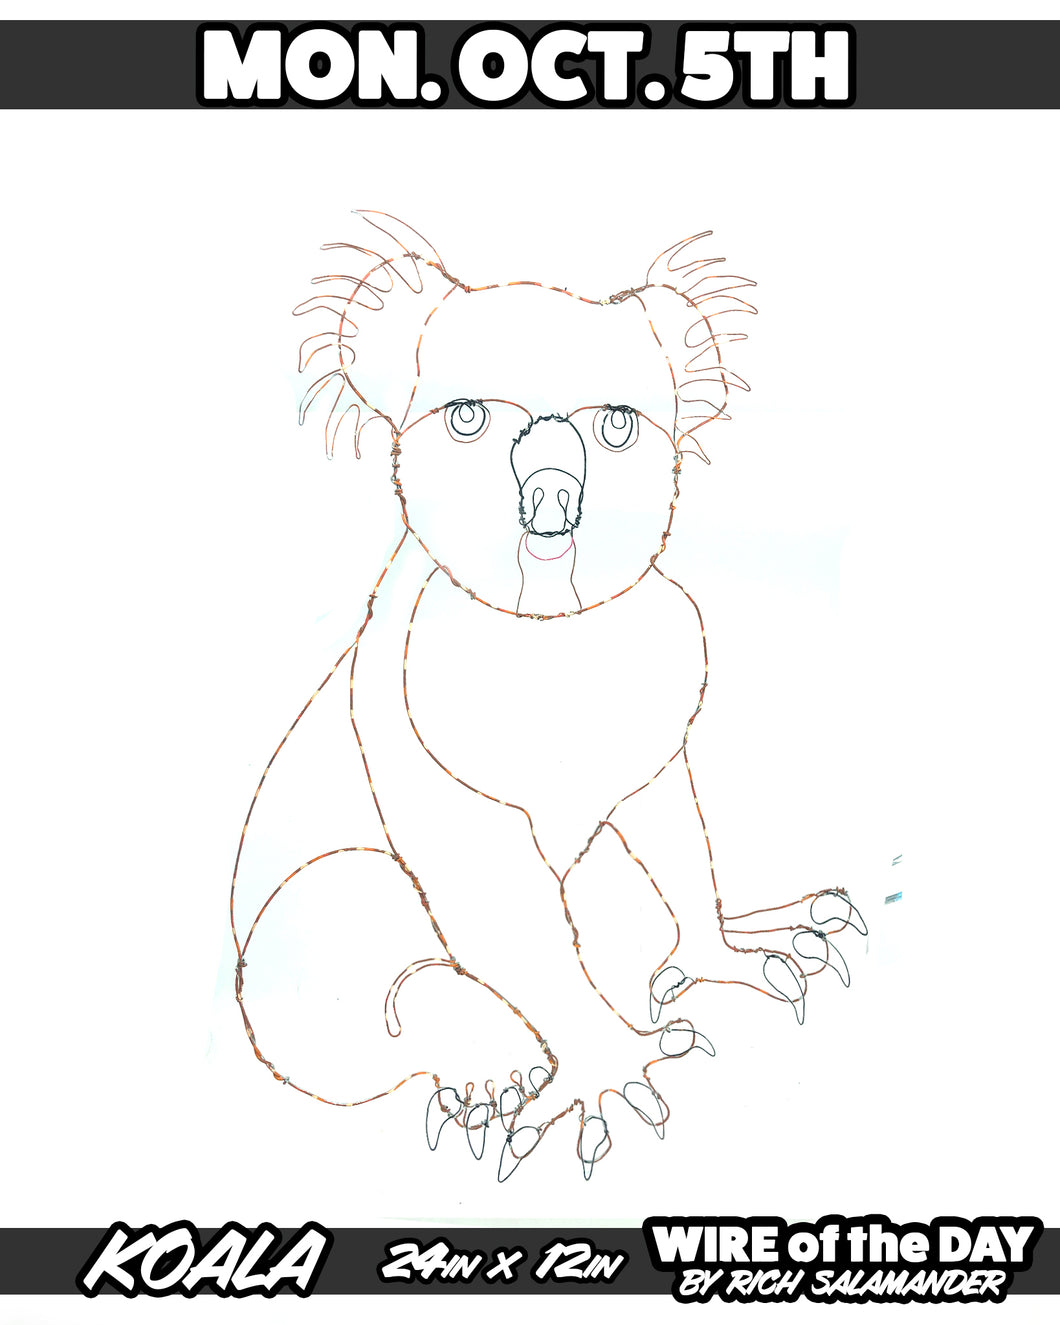 WIRE of the DAY KOALA